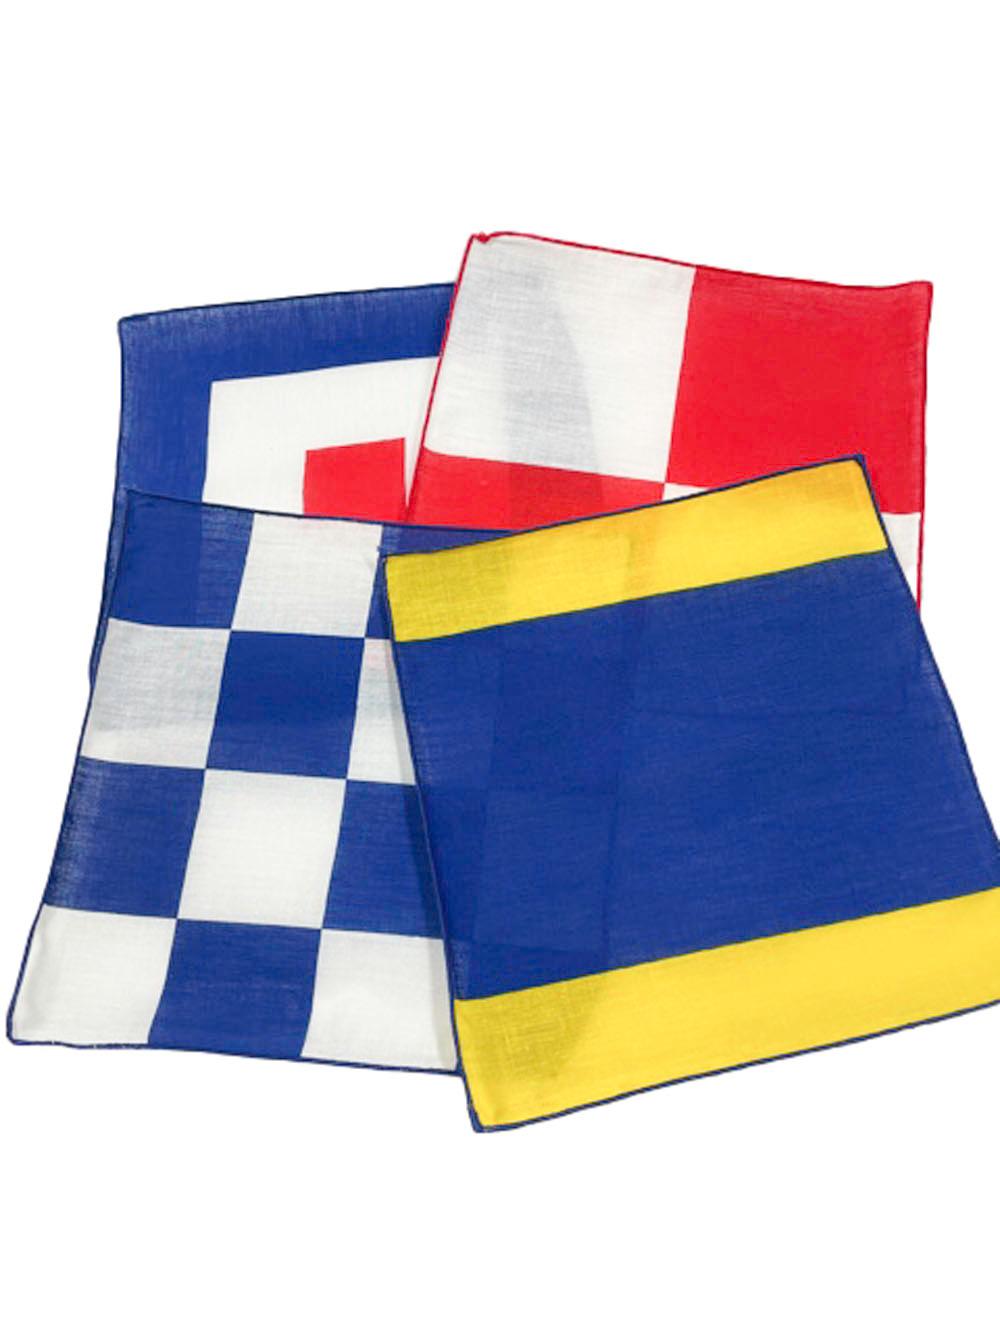 Mid-Century Modern Vintage Set of 12 Linen Cocktail Napkins by Leacock in a Nautical Flag Pattern